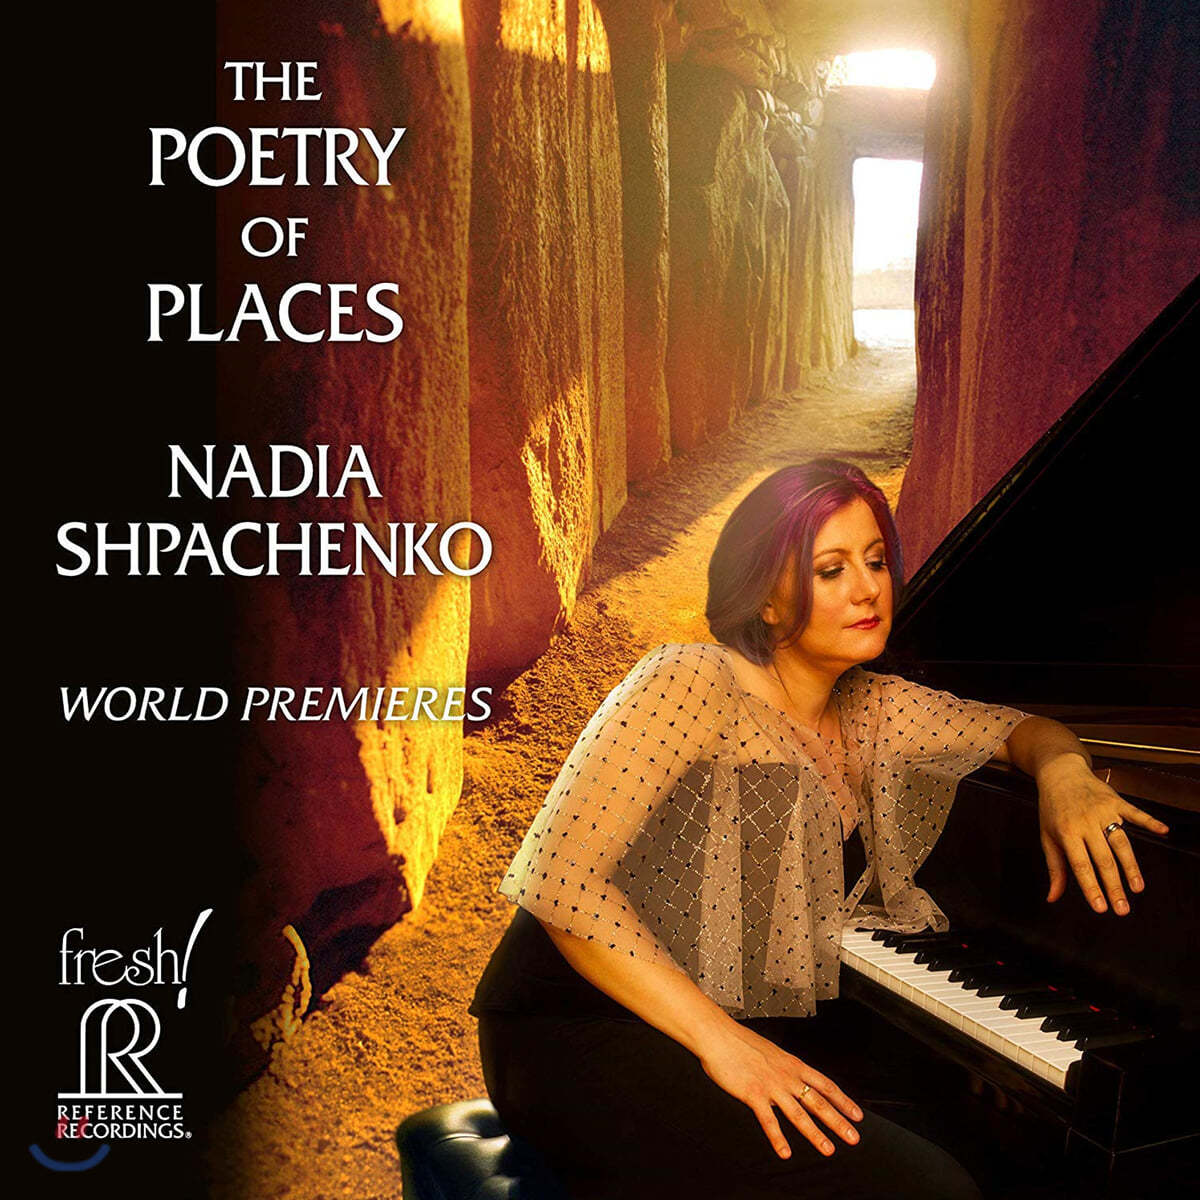 Nadia Shpachenko 위대한 건축물과 장소를 묘사한 작품 (The Poetry of Places)